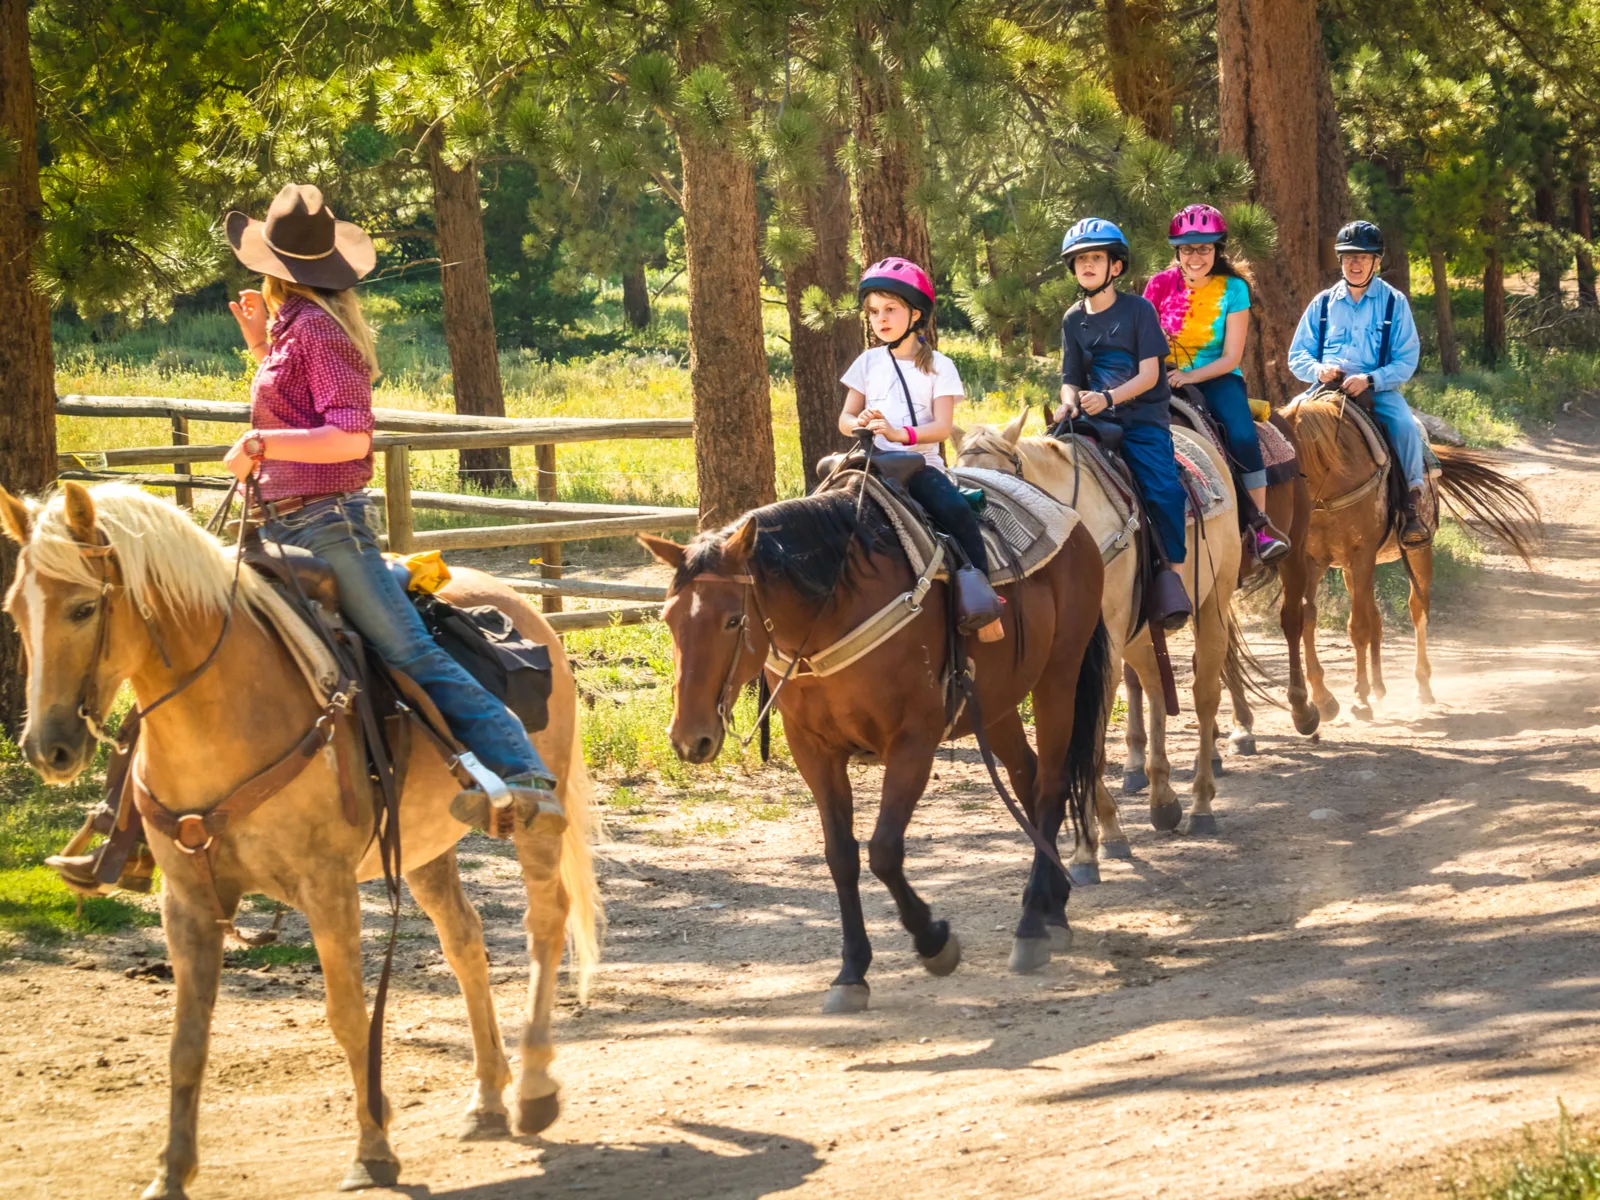 Horseback riding at Ascend, one of the best things to do in Dallas